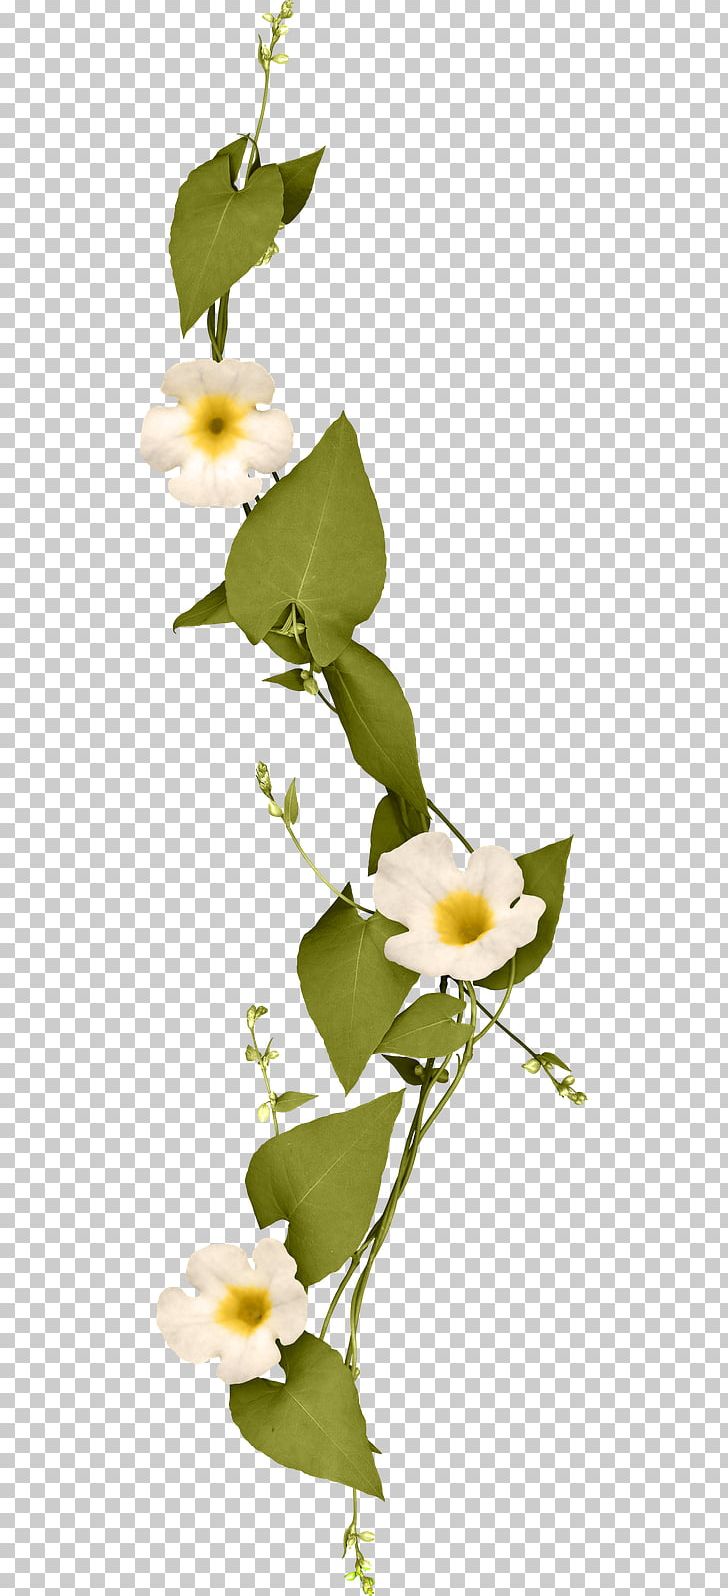 Marriage Hera Floral Design Engagement Wedding PNG, Clipart, Blanco, Branch, Bride, Competence, Deco Free PNG Download